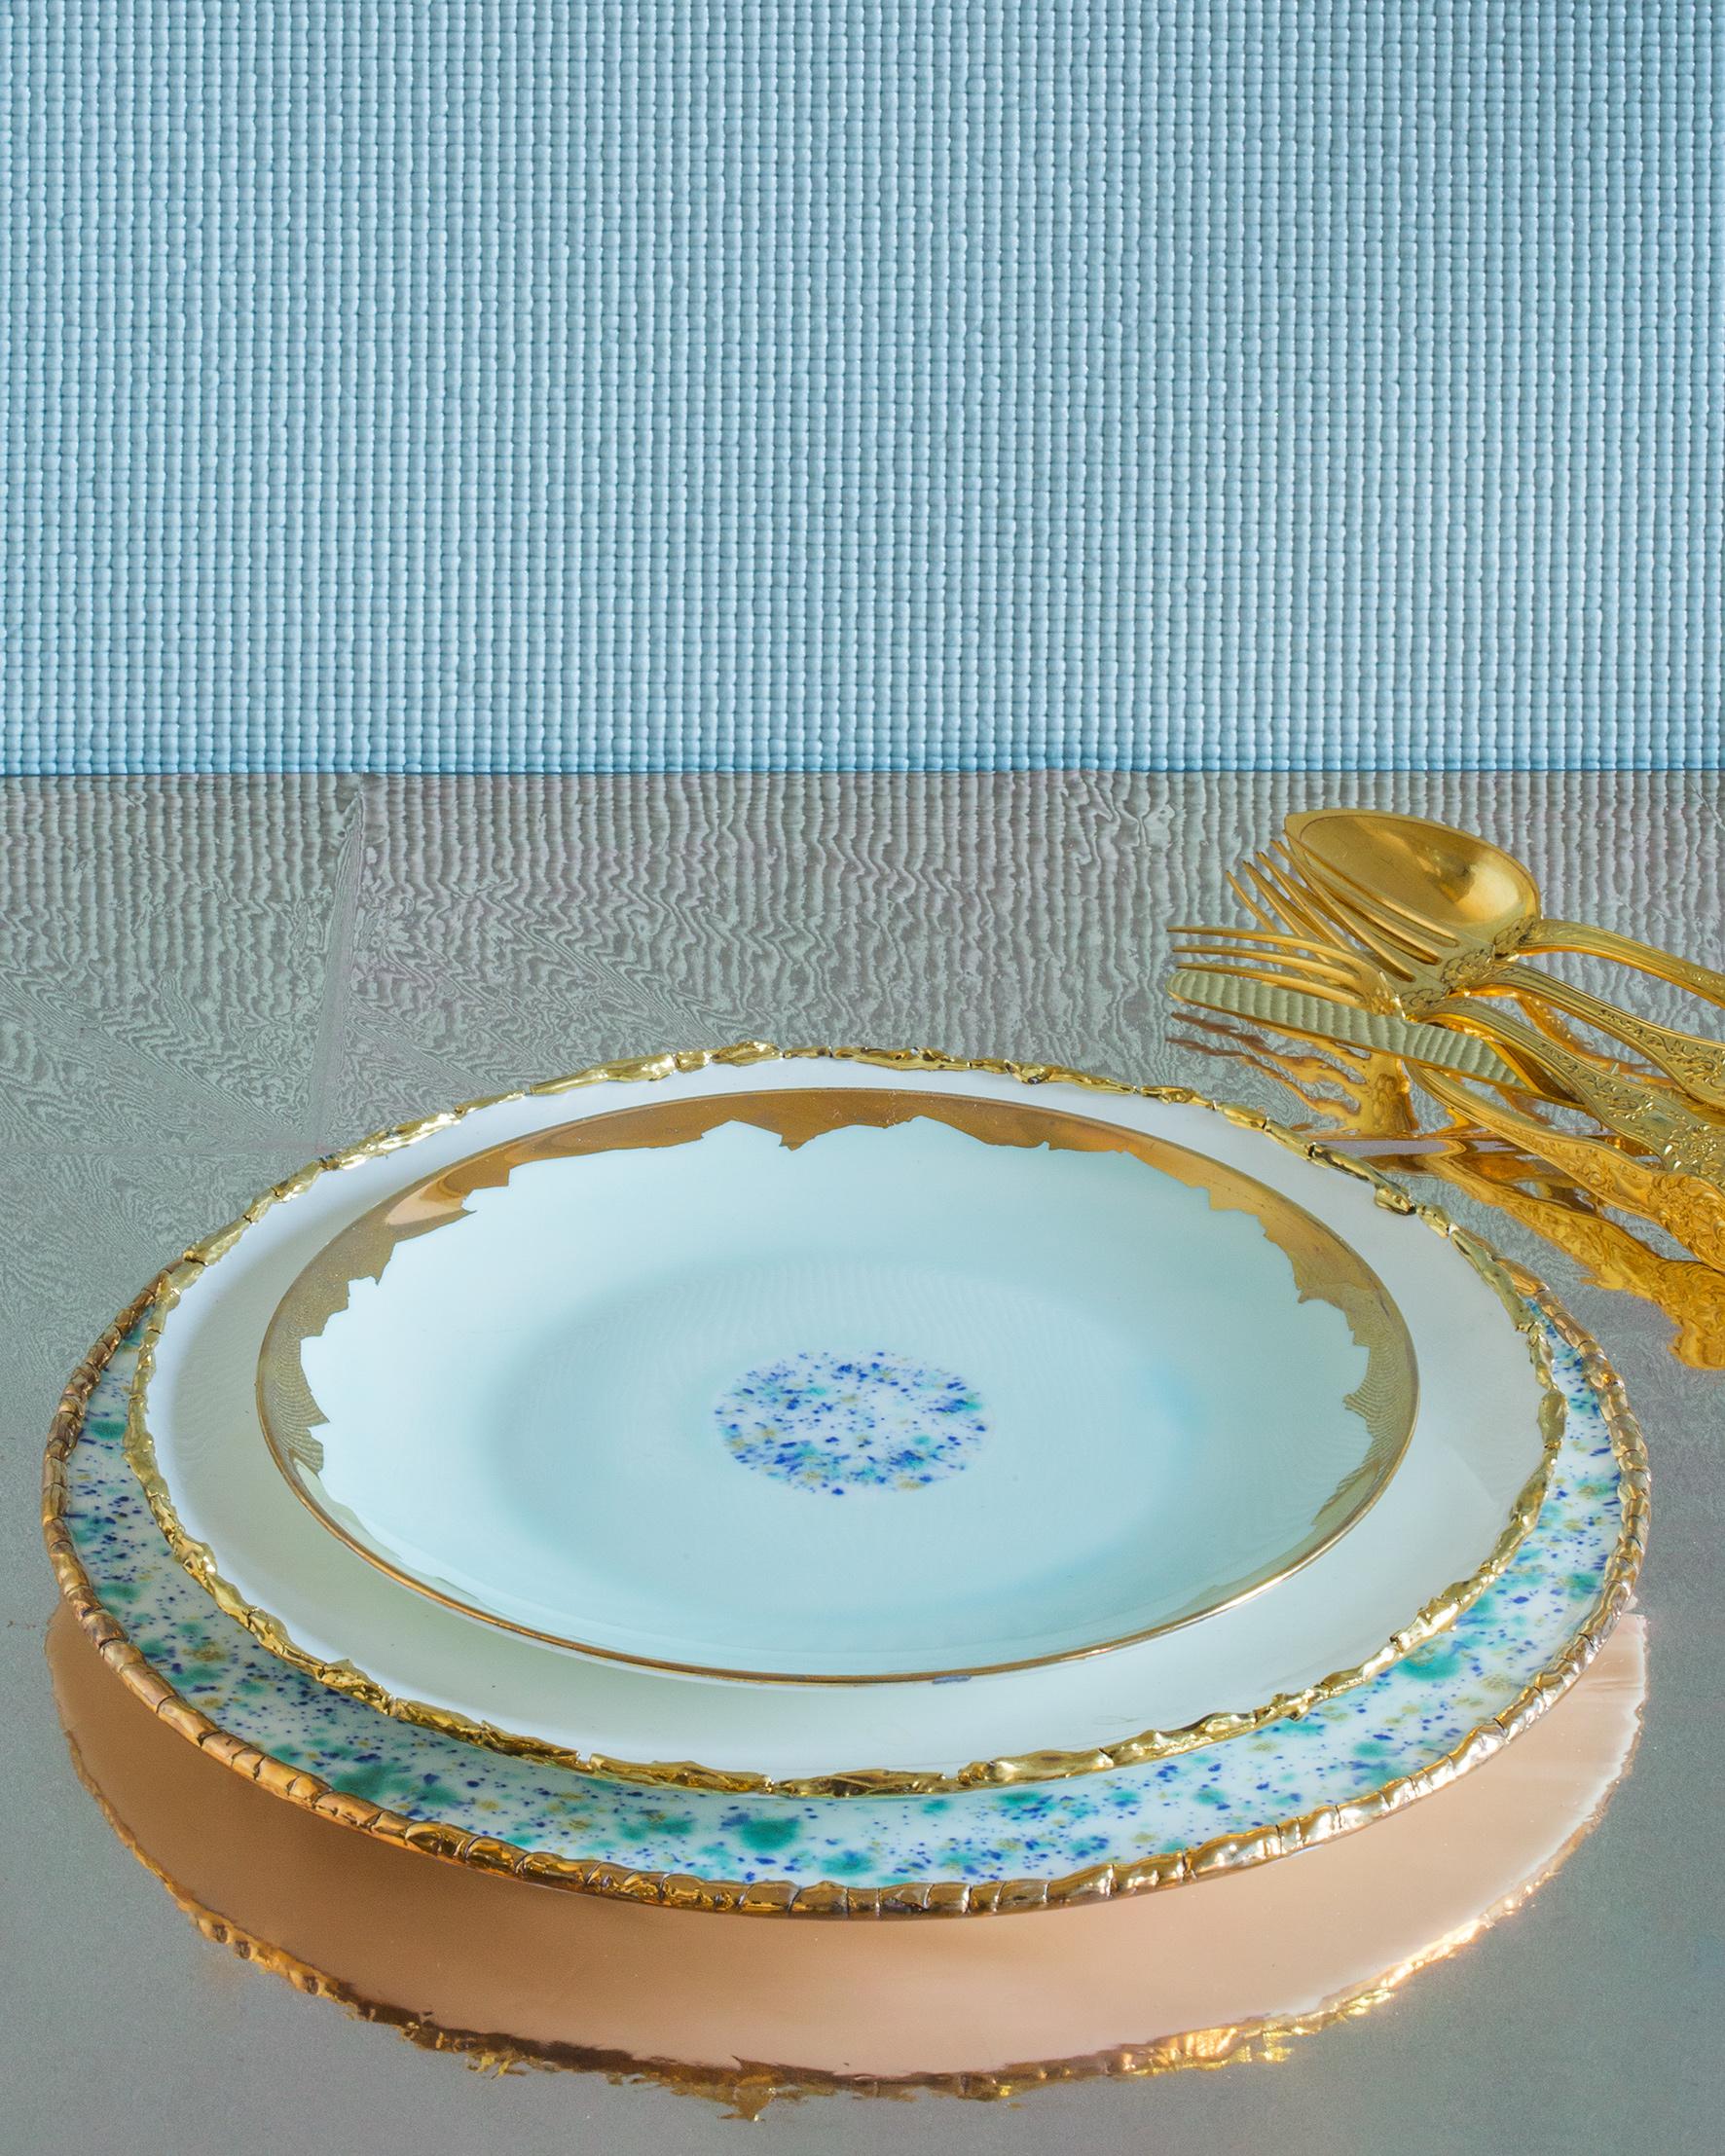 Handcrafted in Italy from the finest porcelain, this Blue Marble Dinner Plate has an original golden crackled rim emphasizing the elegant white with its blue yellow and green decor at the center.

Set of 2 dinner coupe plates, Craquelé edge white, Ø